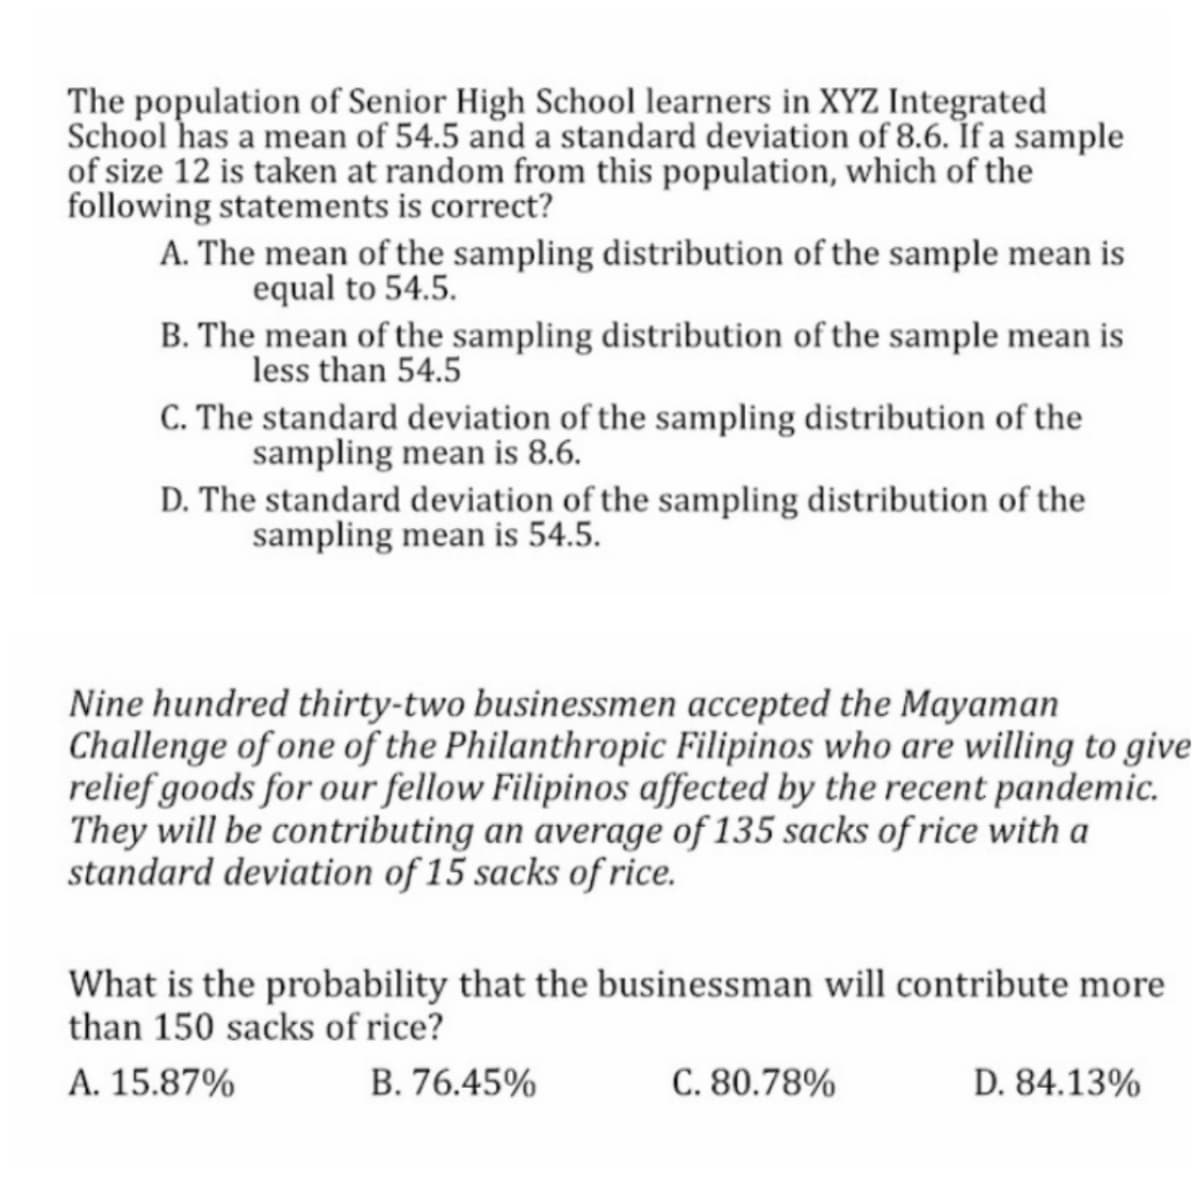 The population of Senior High School learners in XYZ Integrated
School has a mean of 54.5 and a standard deviation of 8.6. Íf a sample
of size 12 is taken at random from this population, which of the
following statements is correct?
A. The mean of the sampling distribution of the sample mean is
equal to 54.5.
B. The mean of the sampling distribution of the sample mean is
less than 54.5
C. The standard deviation of the sampling distribution of the
sampling mean is 8.6.
D. The standard deviation of the sampling distribution of the
sampling mean is 54.5.
Nine hundred thirty-two businessmen accepted the Mayaman
Challenge of one of the Philanthropic Filipinos who are willing to give
relief goods for our fellow Filipinos affected by the recent pandemic.
They will be contributing an average of 135 sacks of rice with a
standard deviation of 15 sacks of rice.
What is the probability that the businessman will contribute more
than 150 sacks of rice?
A. 15.87%
B. 76.45%
C. 80.78%
D. 84.13%
